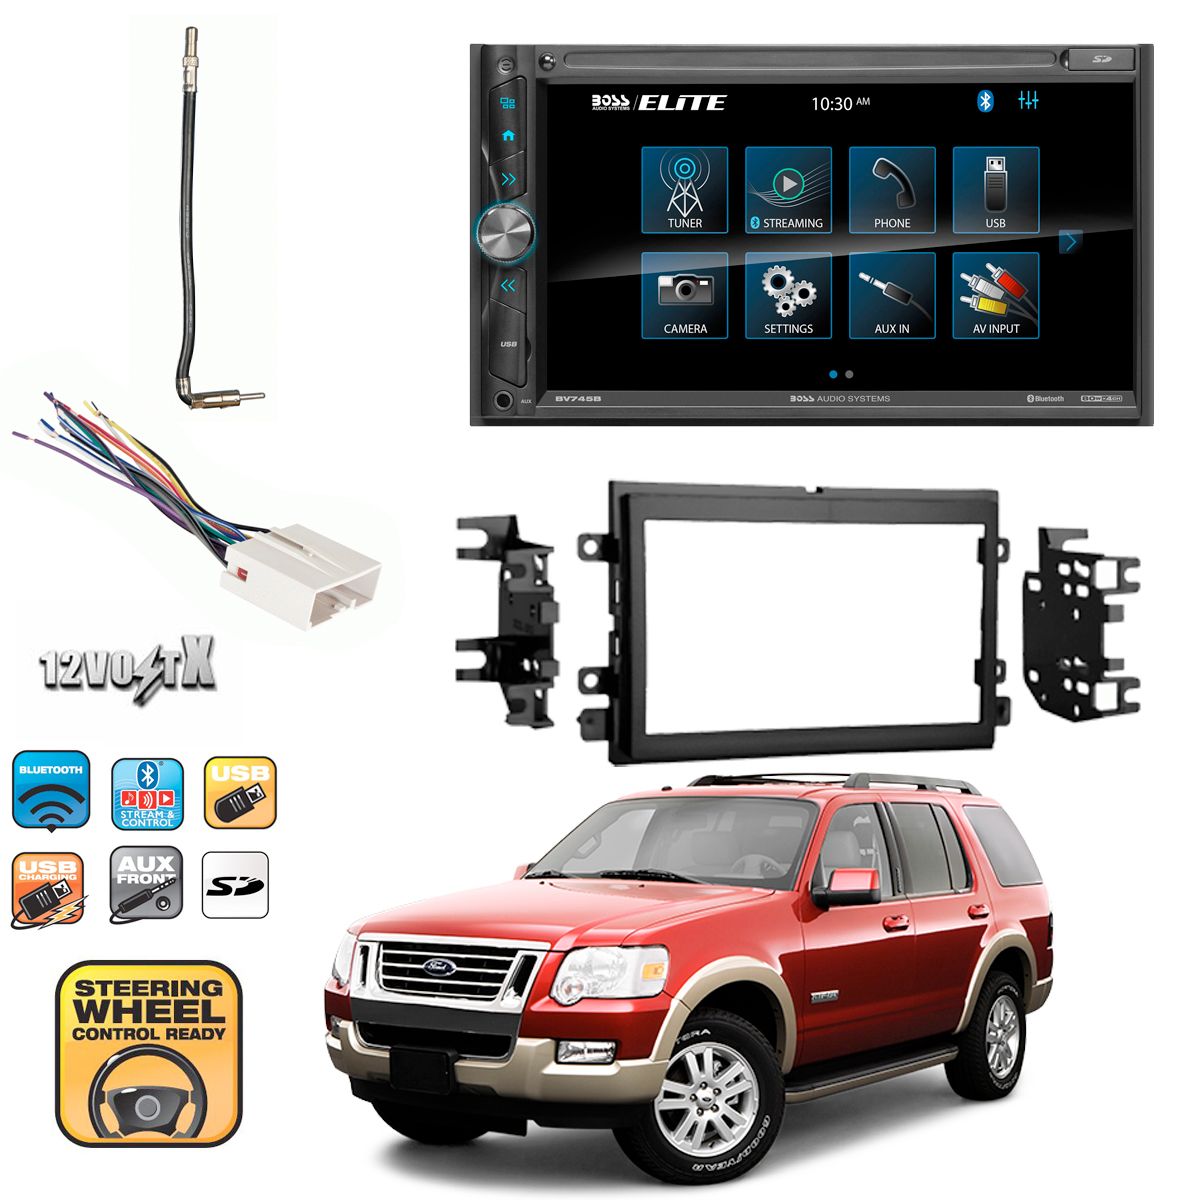 Touchscreen Bluetooth DVD Player For Ford Multi-Kit 2004-Up with install parts